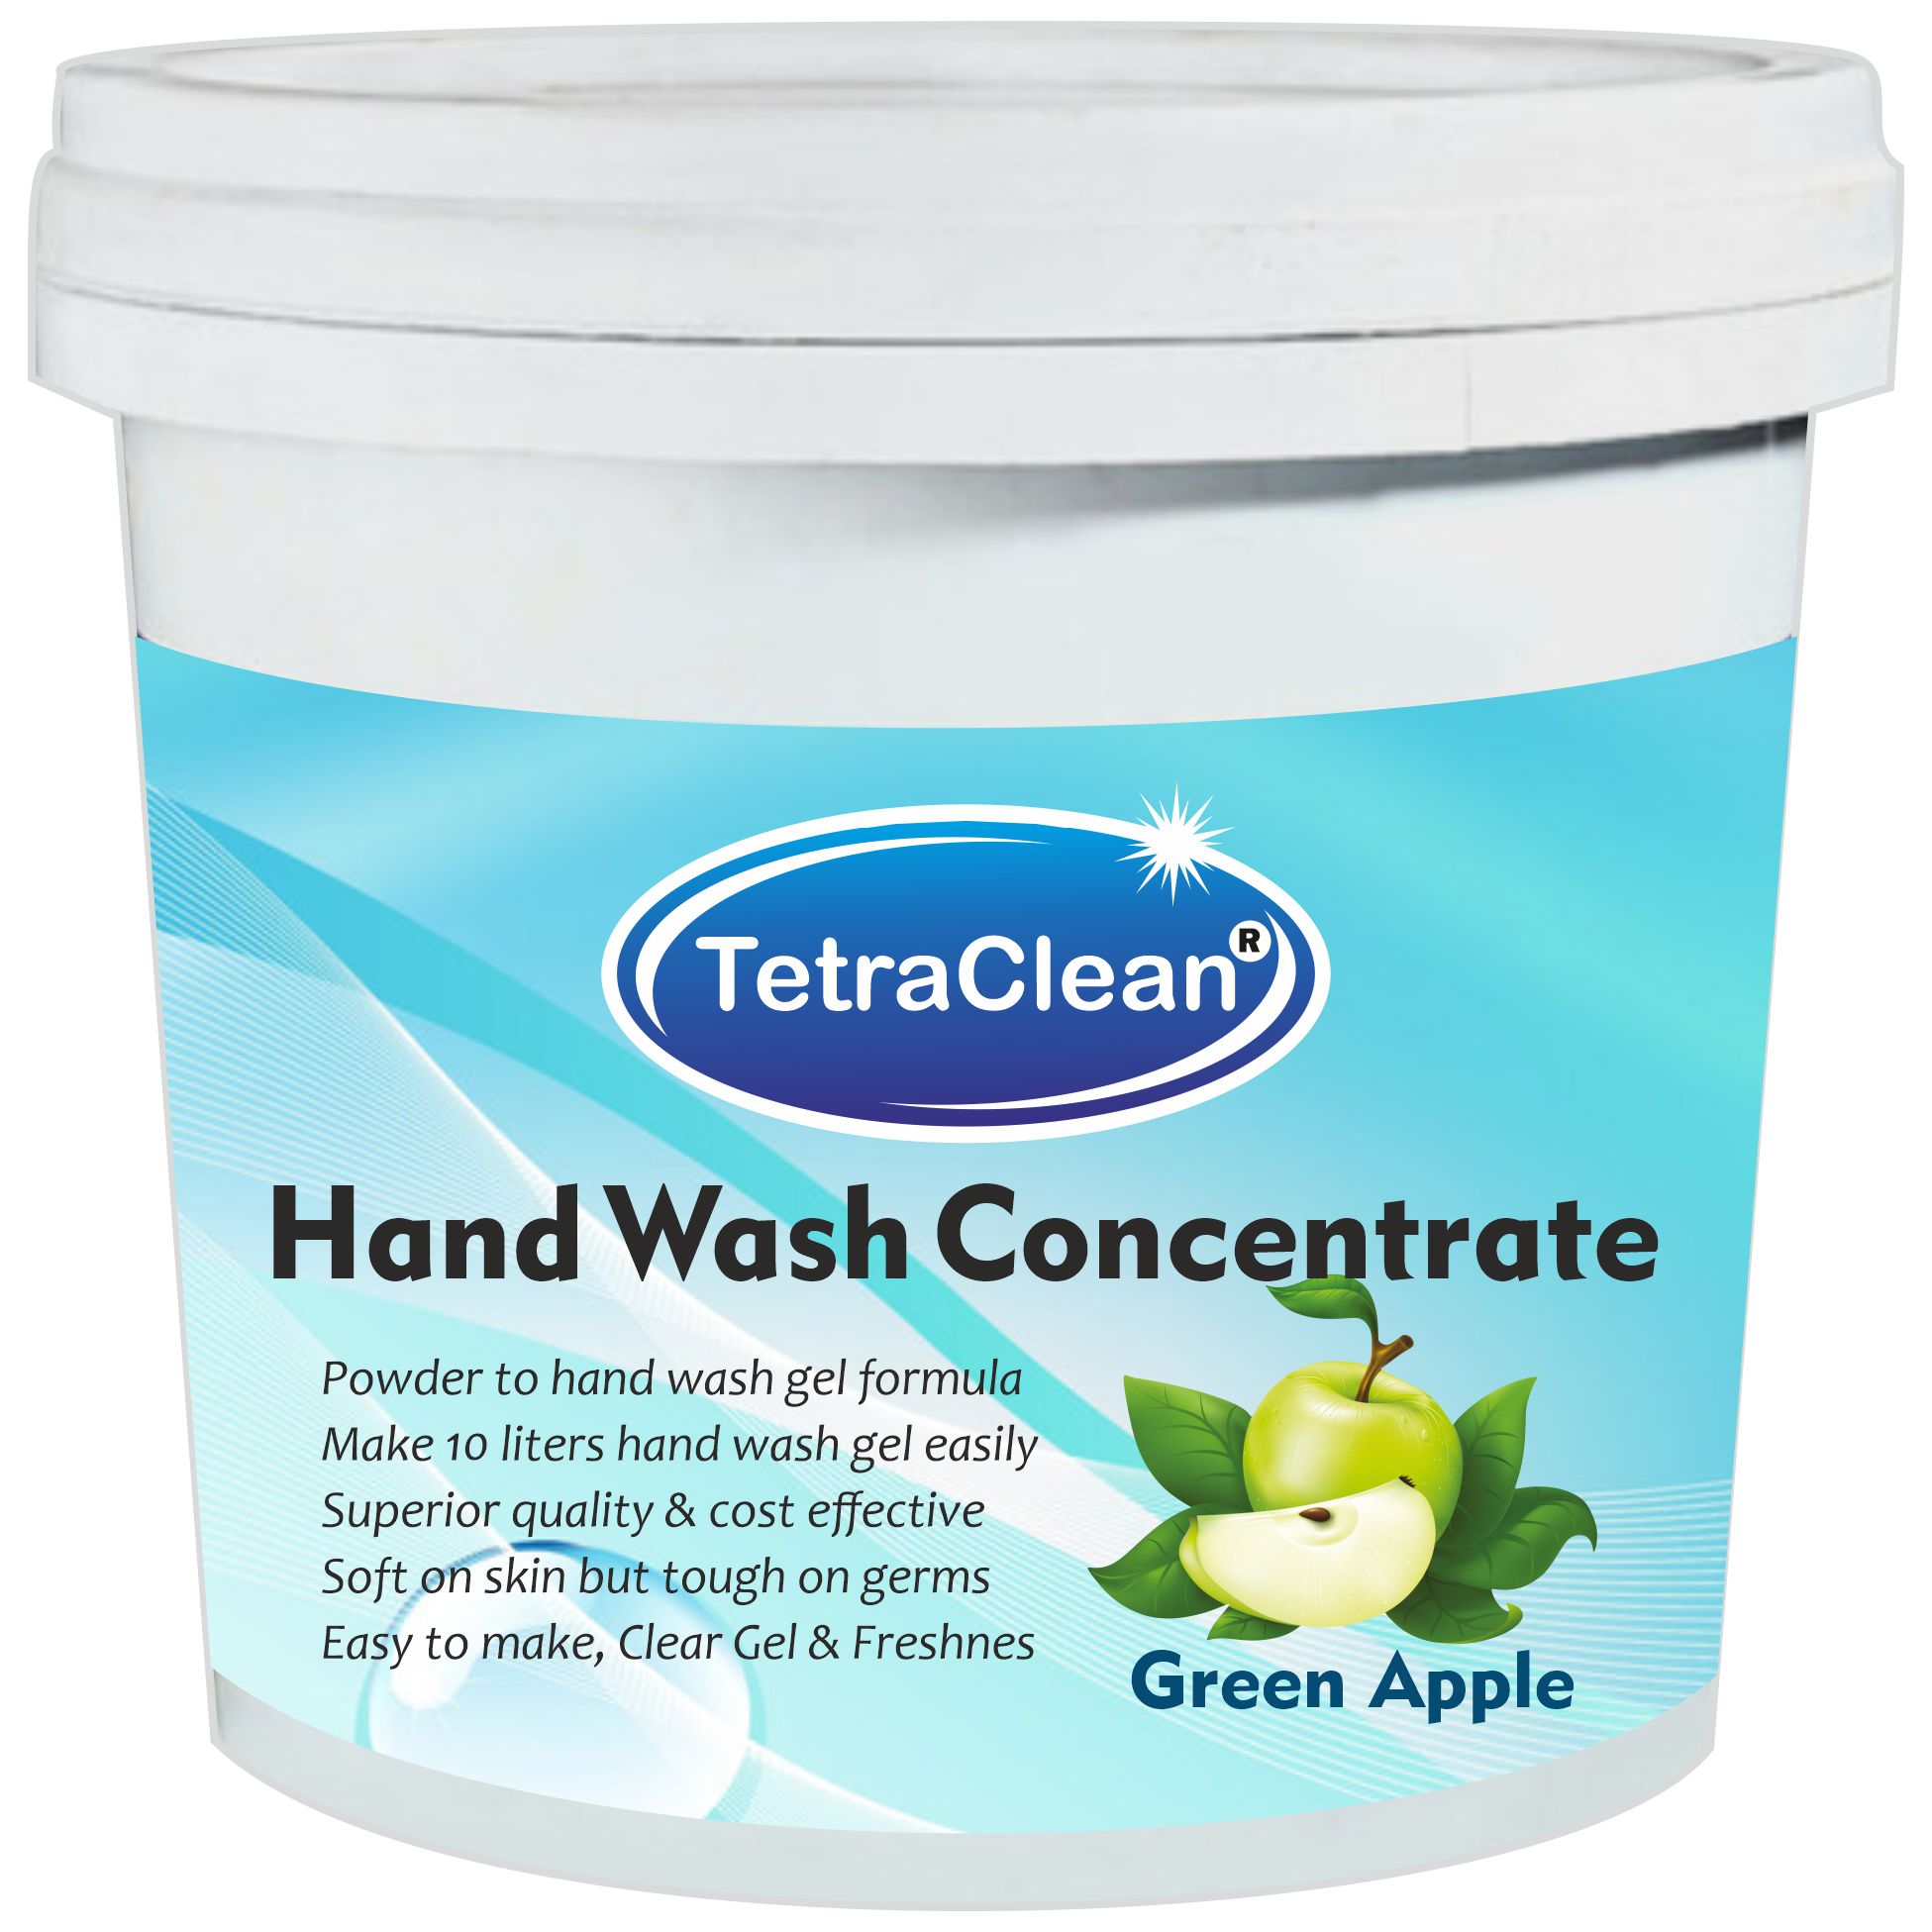 TetraClean Hand Wash Concentrate Powder - 500gm packing - with green apple fragrance